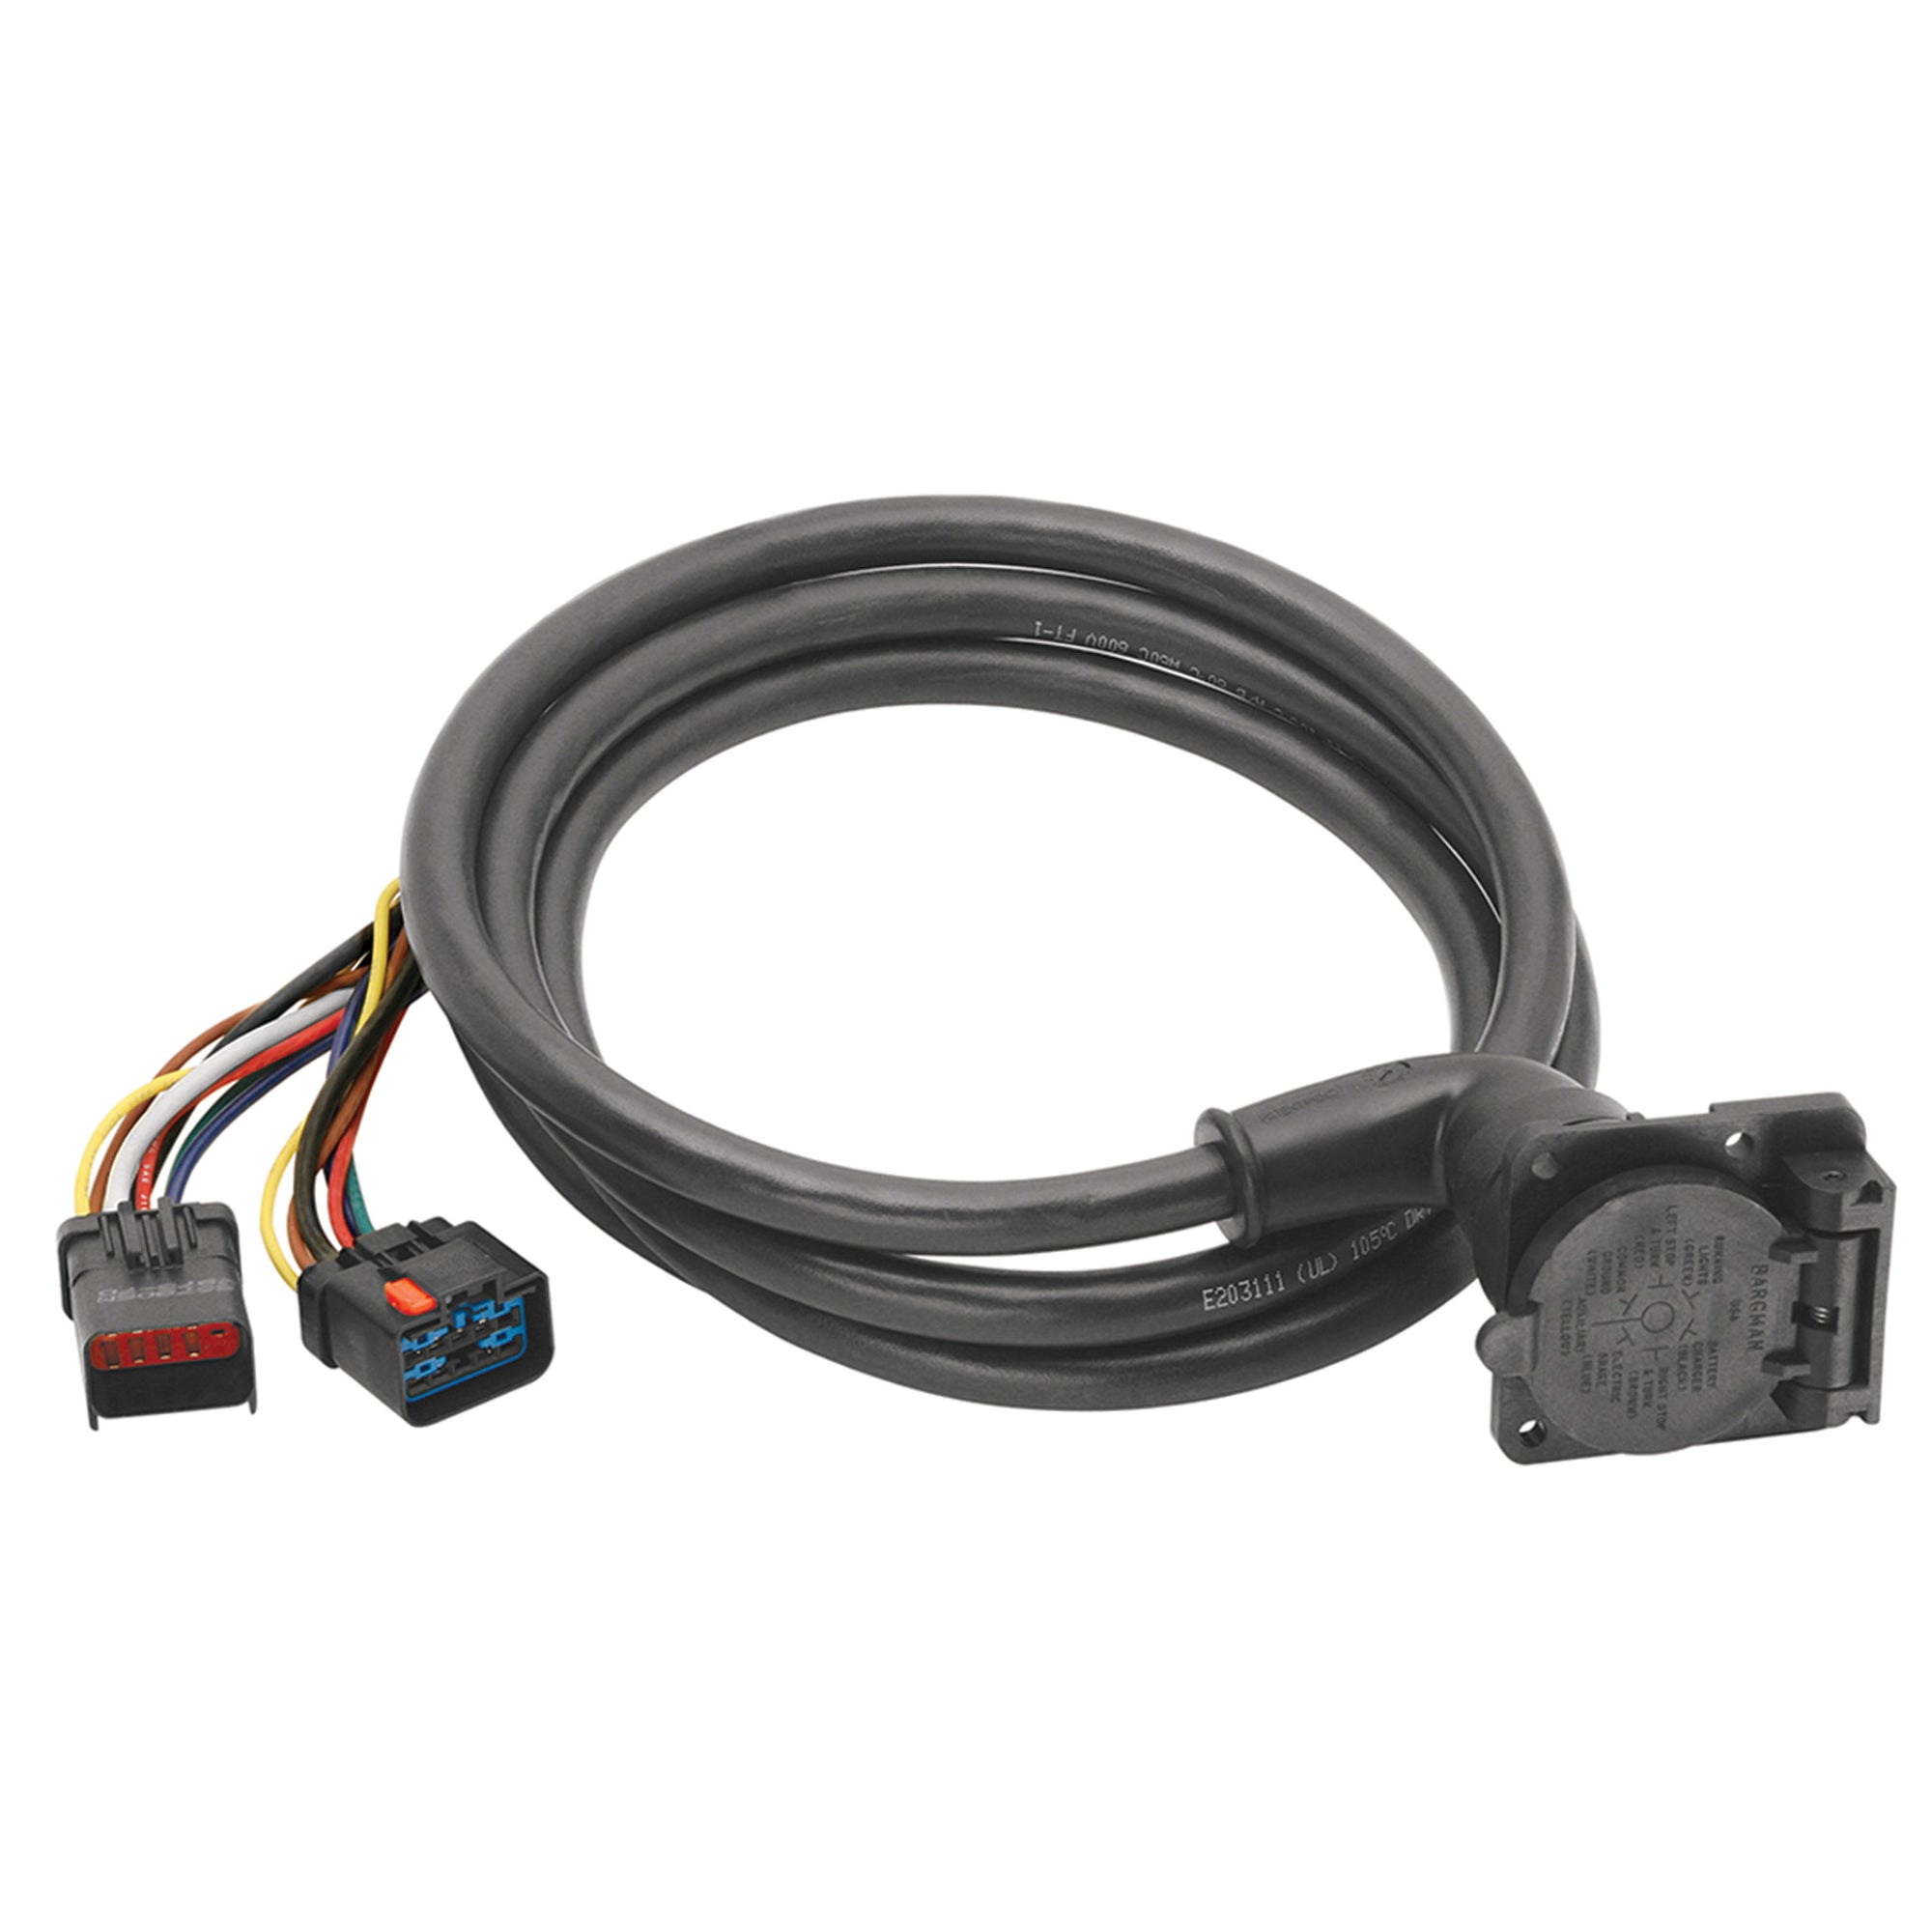 Bargman 51-97-411 7-Way 90° Fifth Wheel Adapter Harness w/ 9' Cable - Dodge